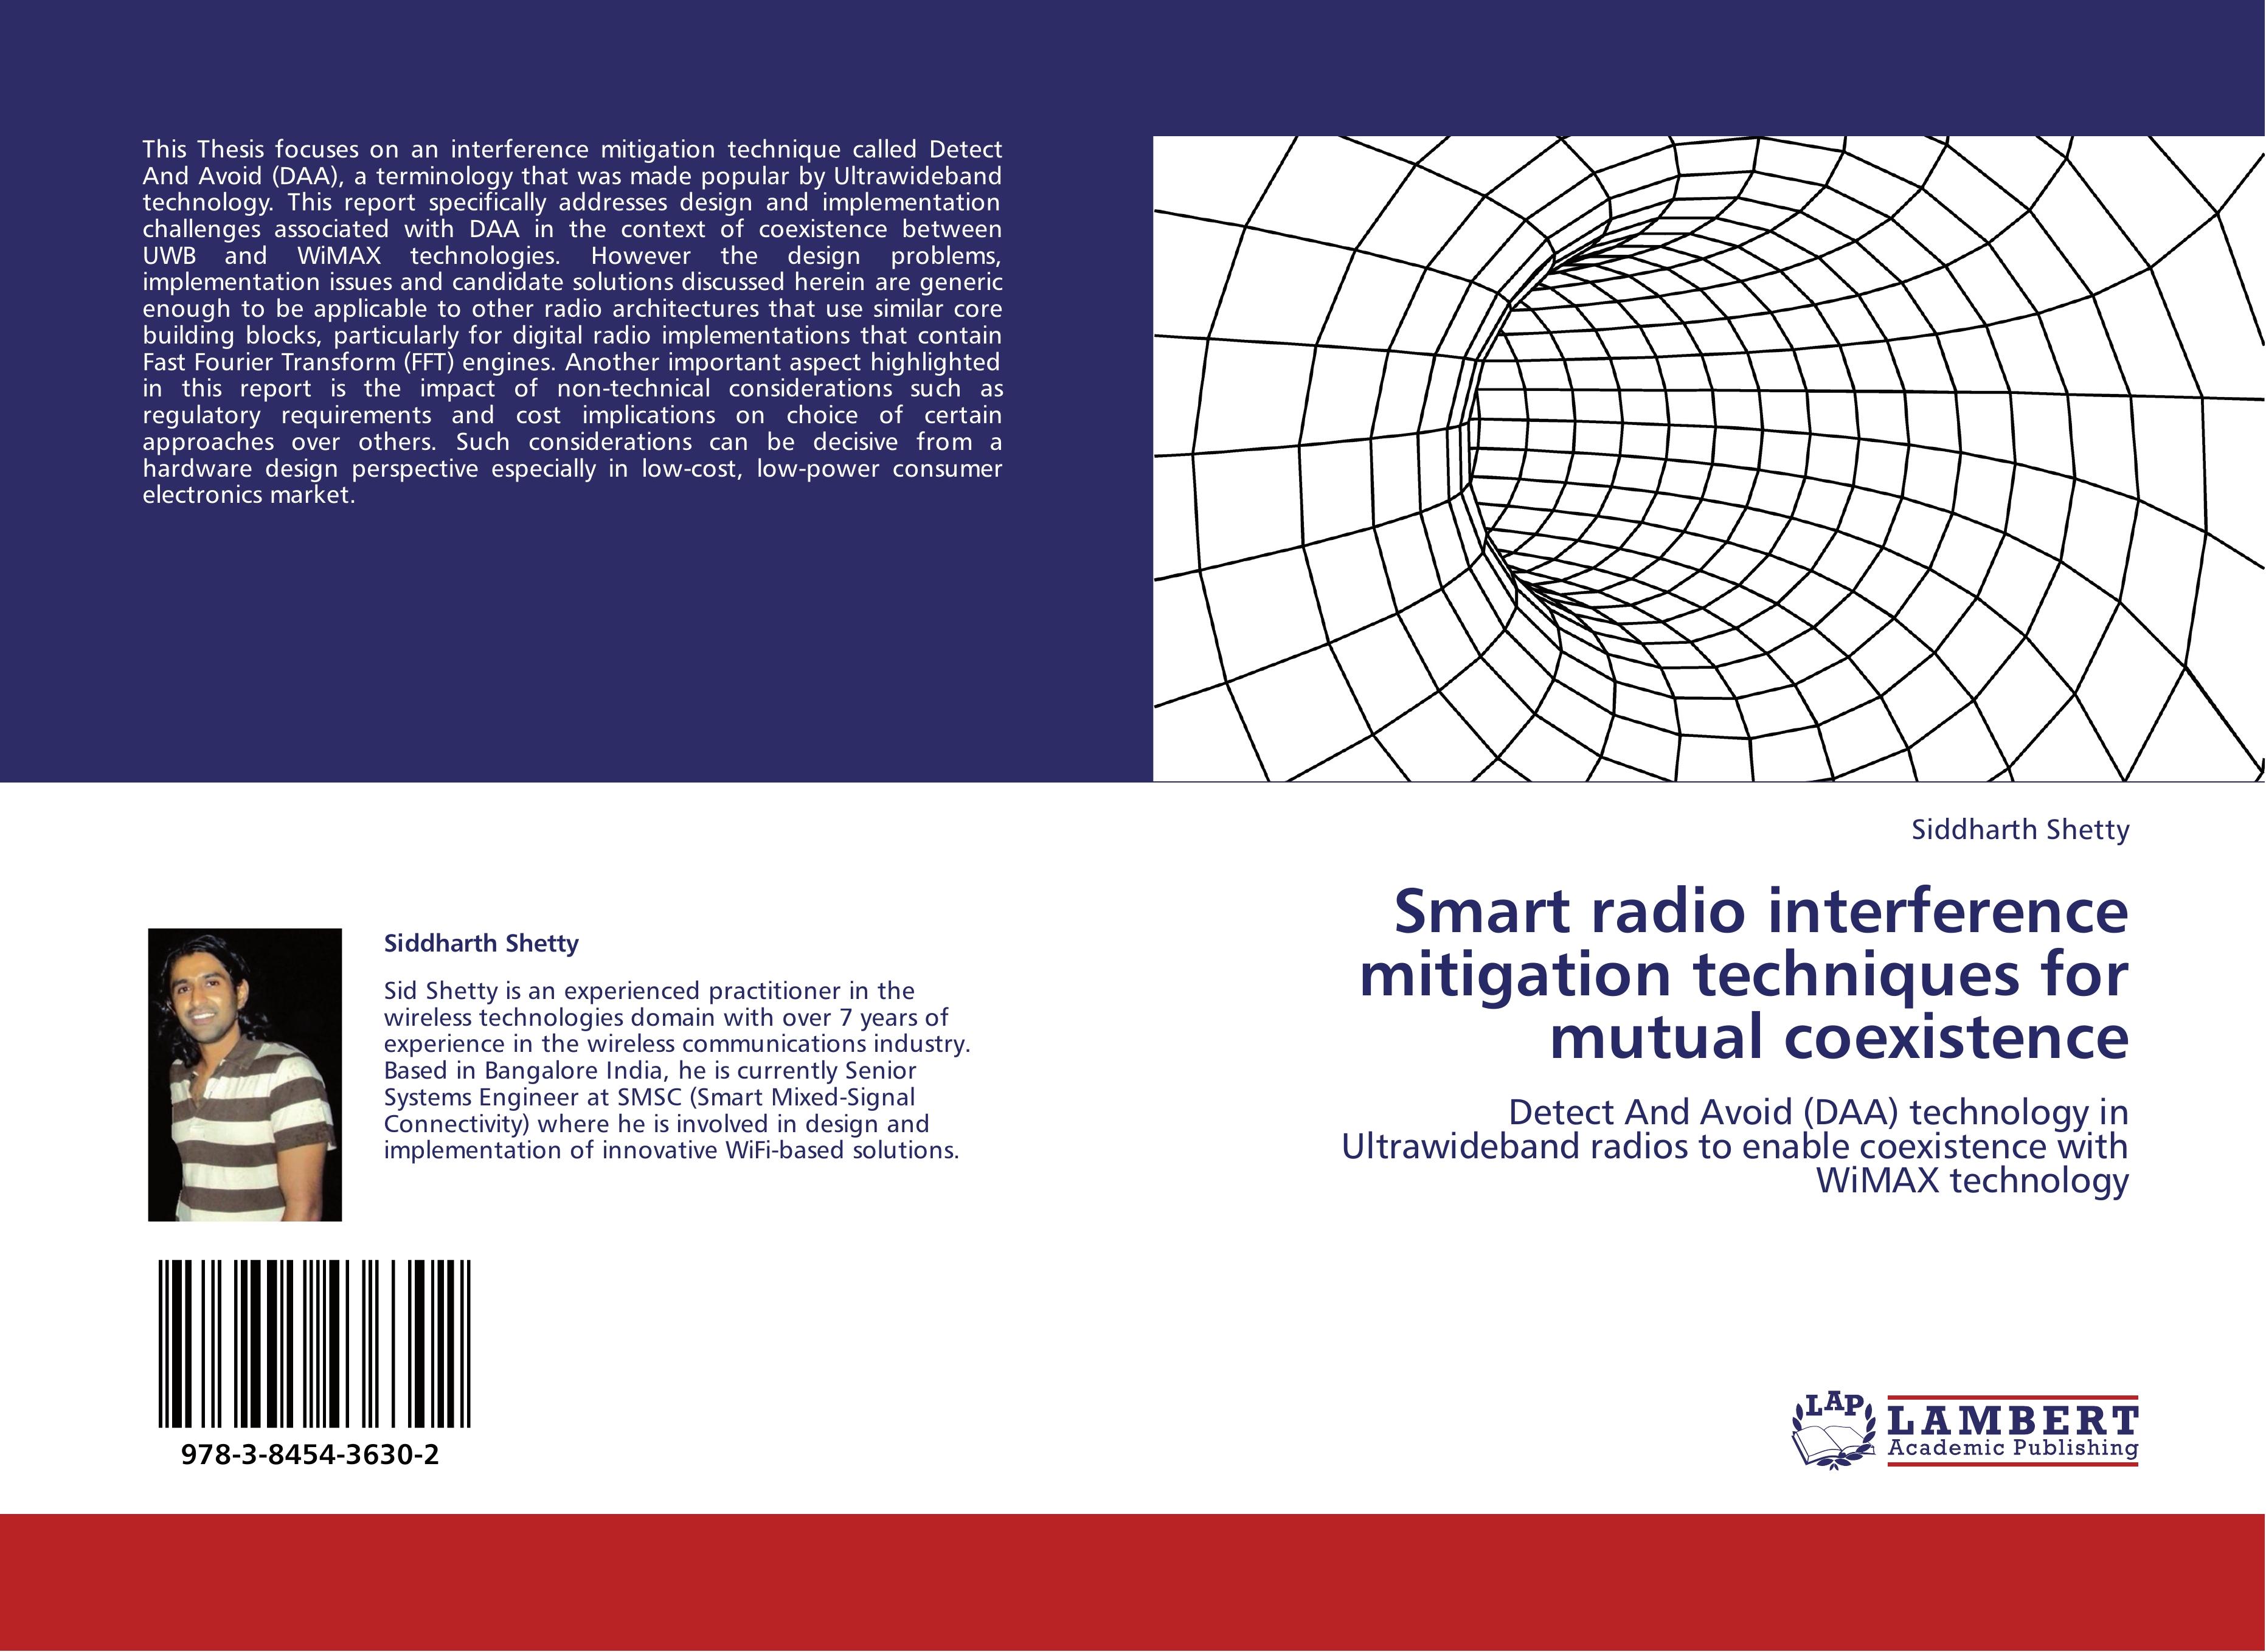 Smart radio interference mitigation techniques for mutual coexistence / Detect And Avoid (DAA) technology in Ultrawideband radios to enable coexistence with WiMAX technology / Siddharth Shetty / Buch - Shetty, Siddharth